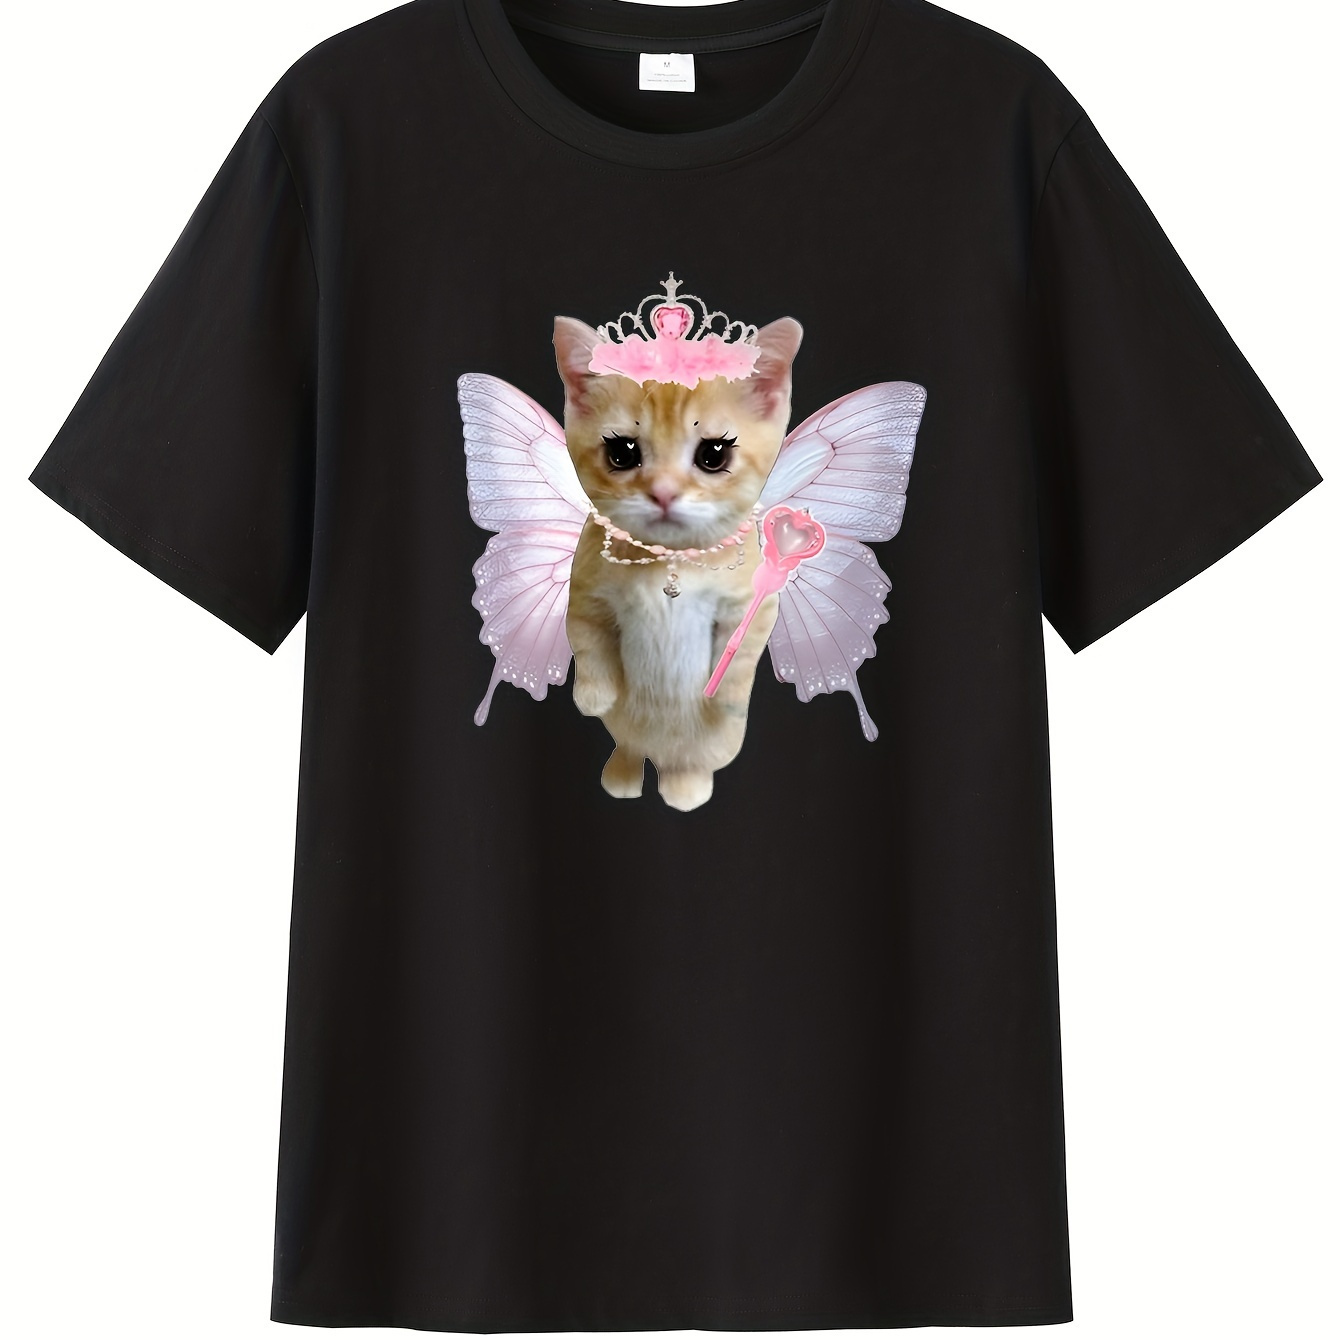 

Cute Kitten Fairy Graphic Print, Men's Crew Neck Short Sleeve Summer T-shirt, Casual Comfy Fit Top For Daily And Outdoor Wear, Cat Lovers T-shirt